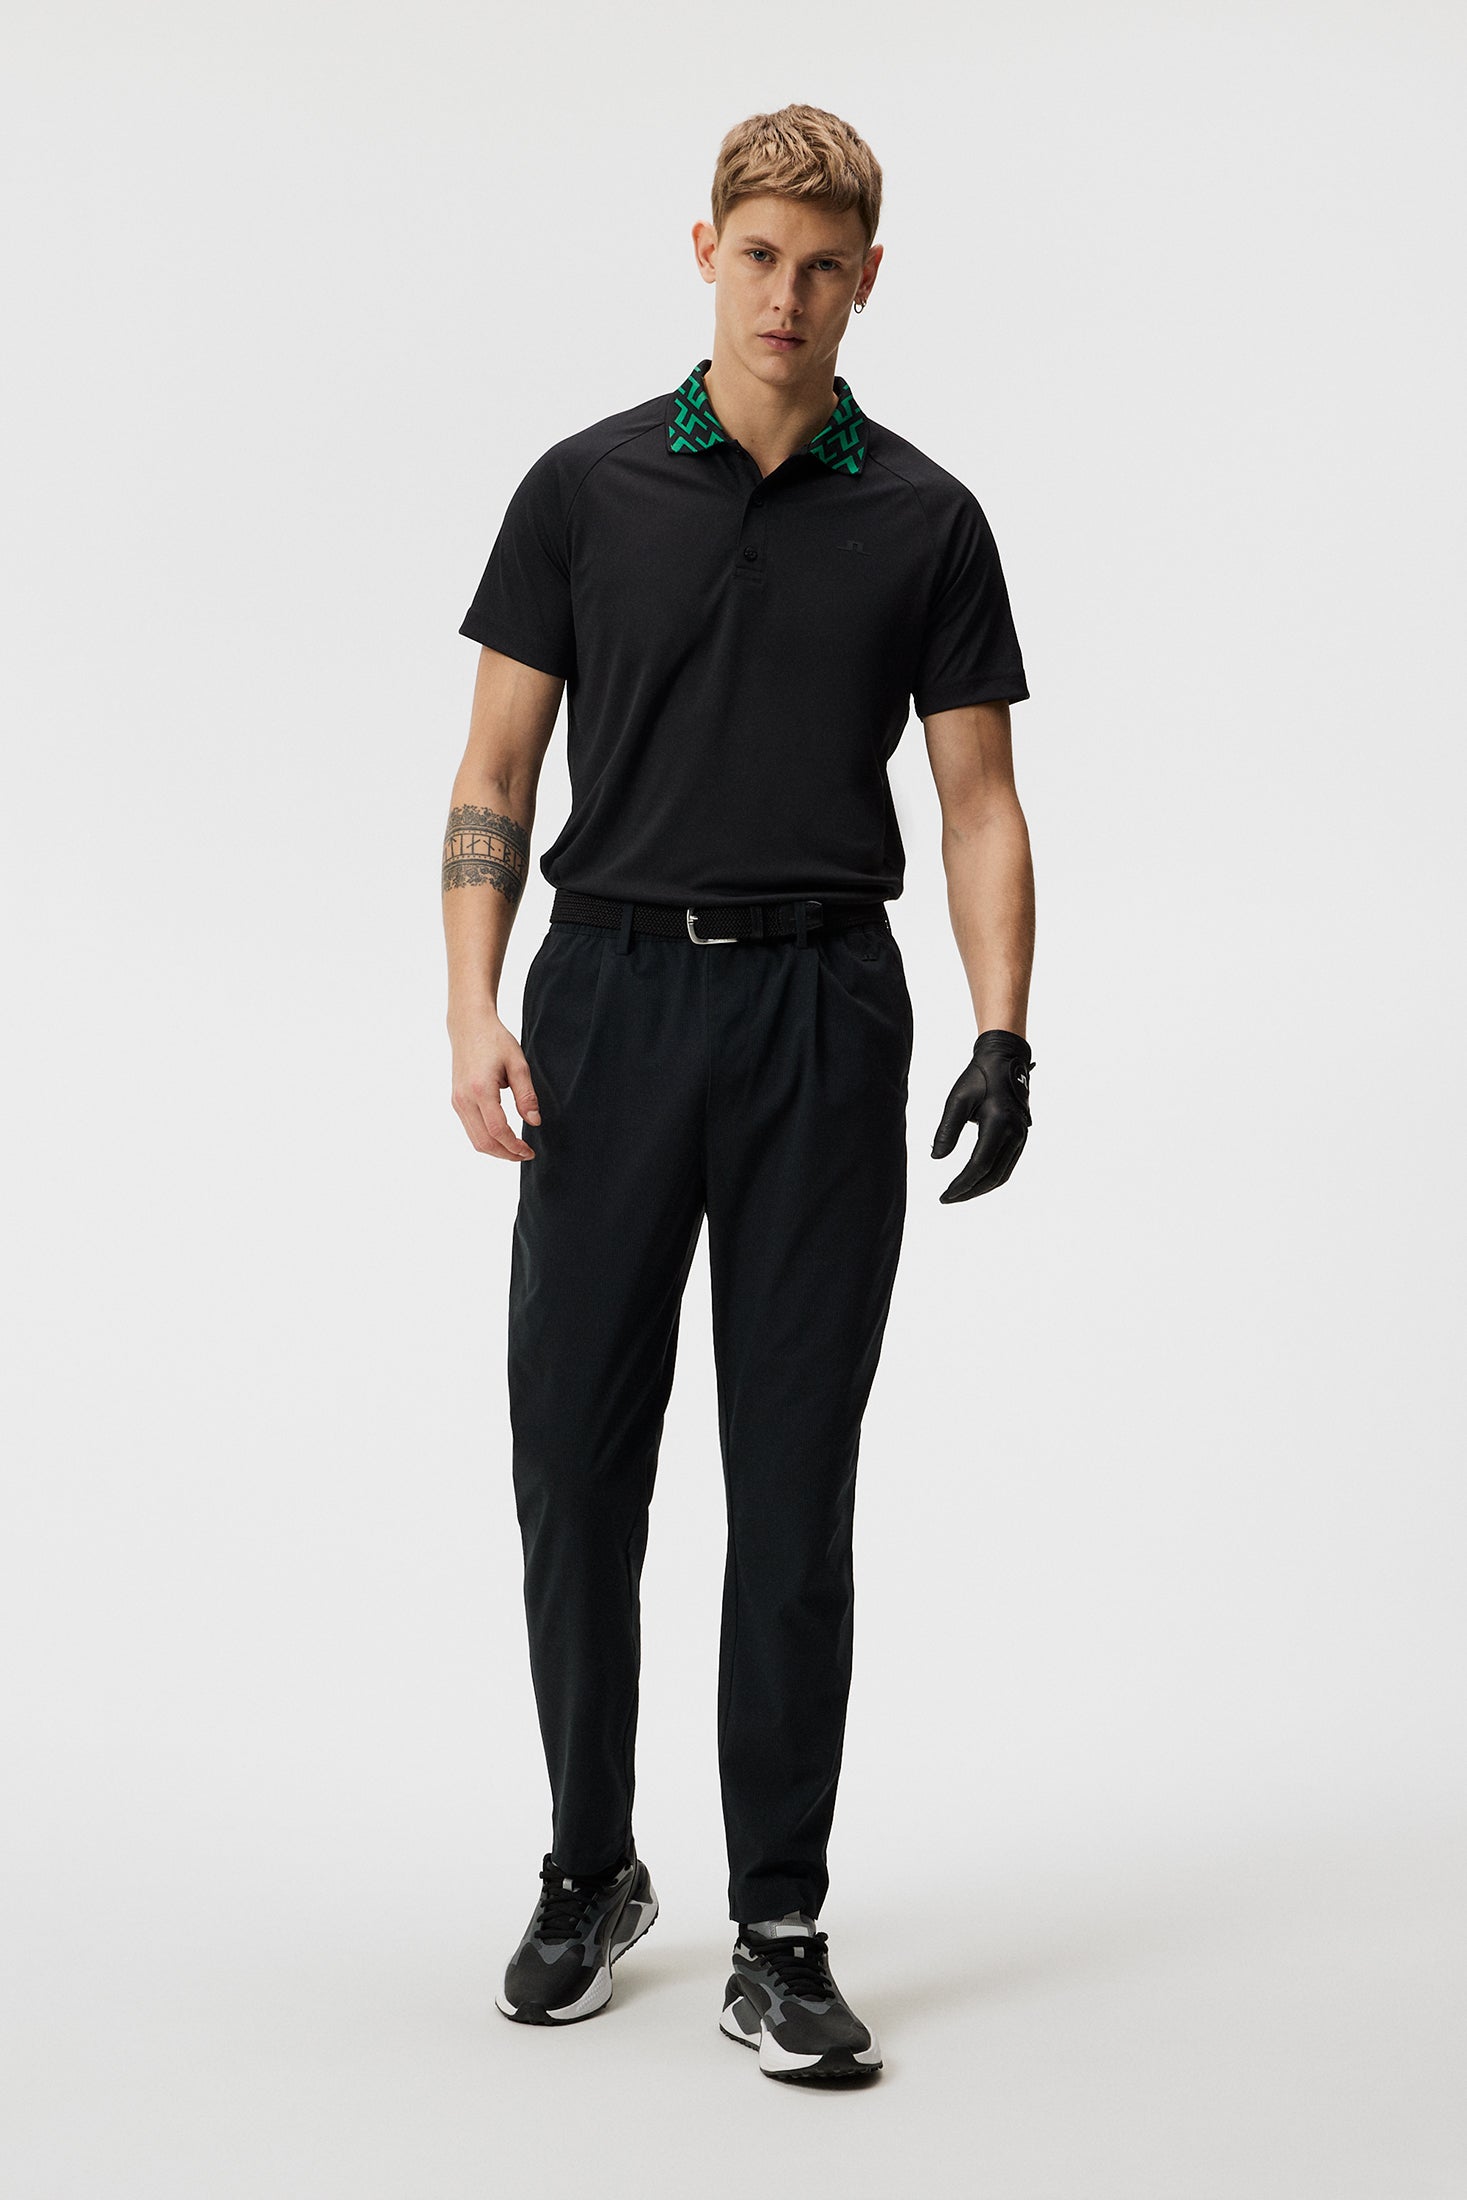 Trousers for Men's| Formal, Casual, Chinos, Pants | Classicpolo